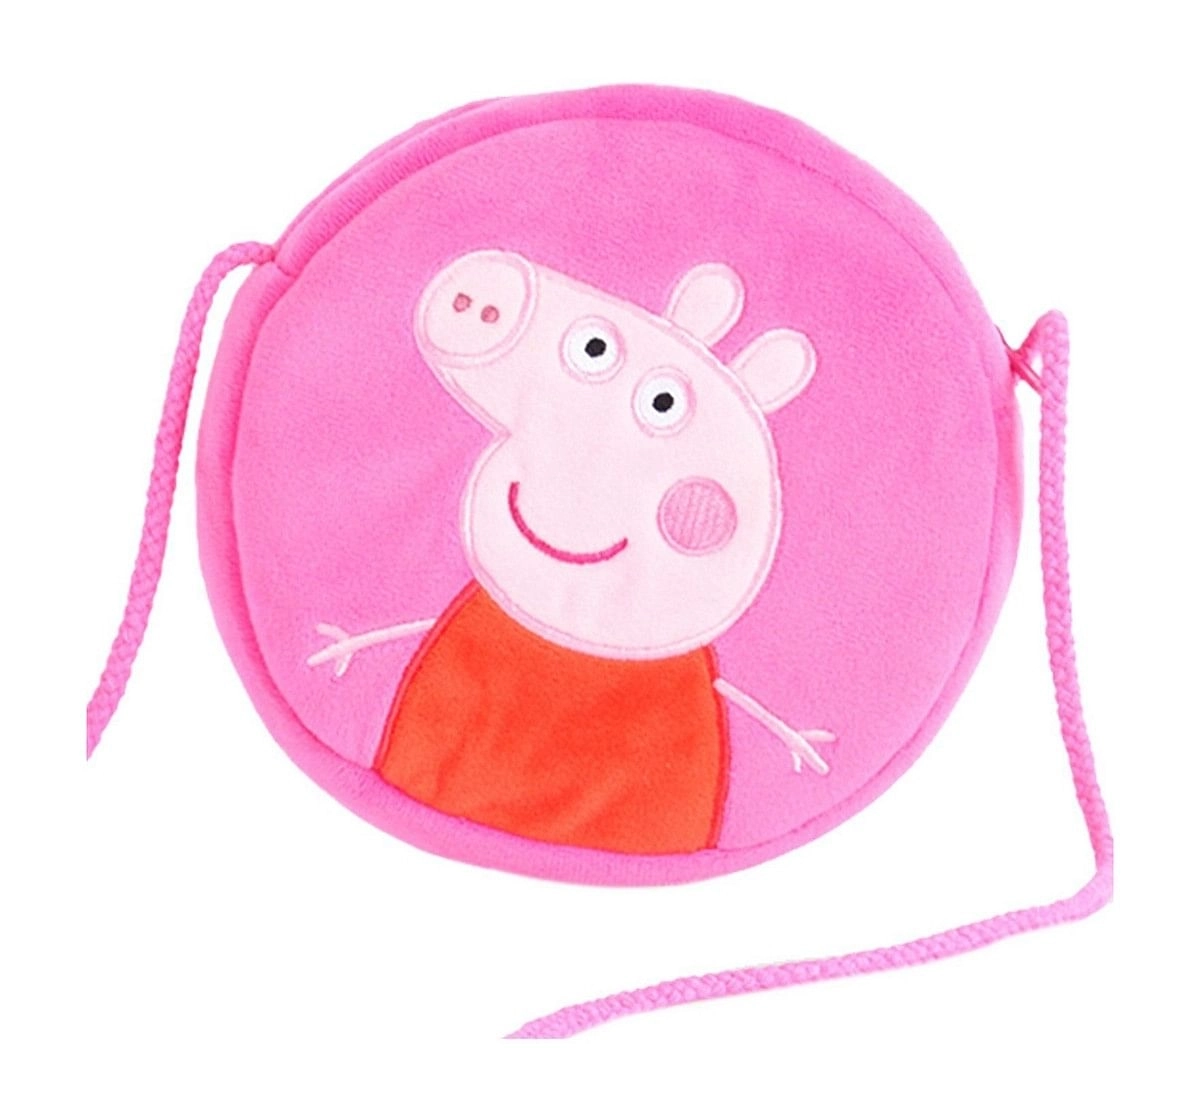 Peppa Pig Soft Toy Wallet Round Multi Color for Kids age 3Y+ - 16 Cm (Pink) 